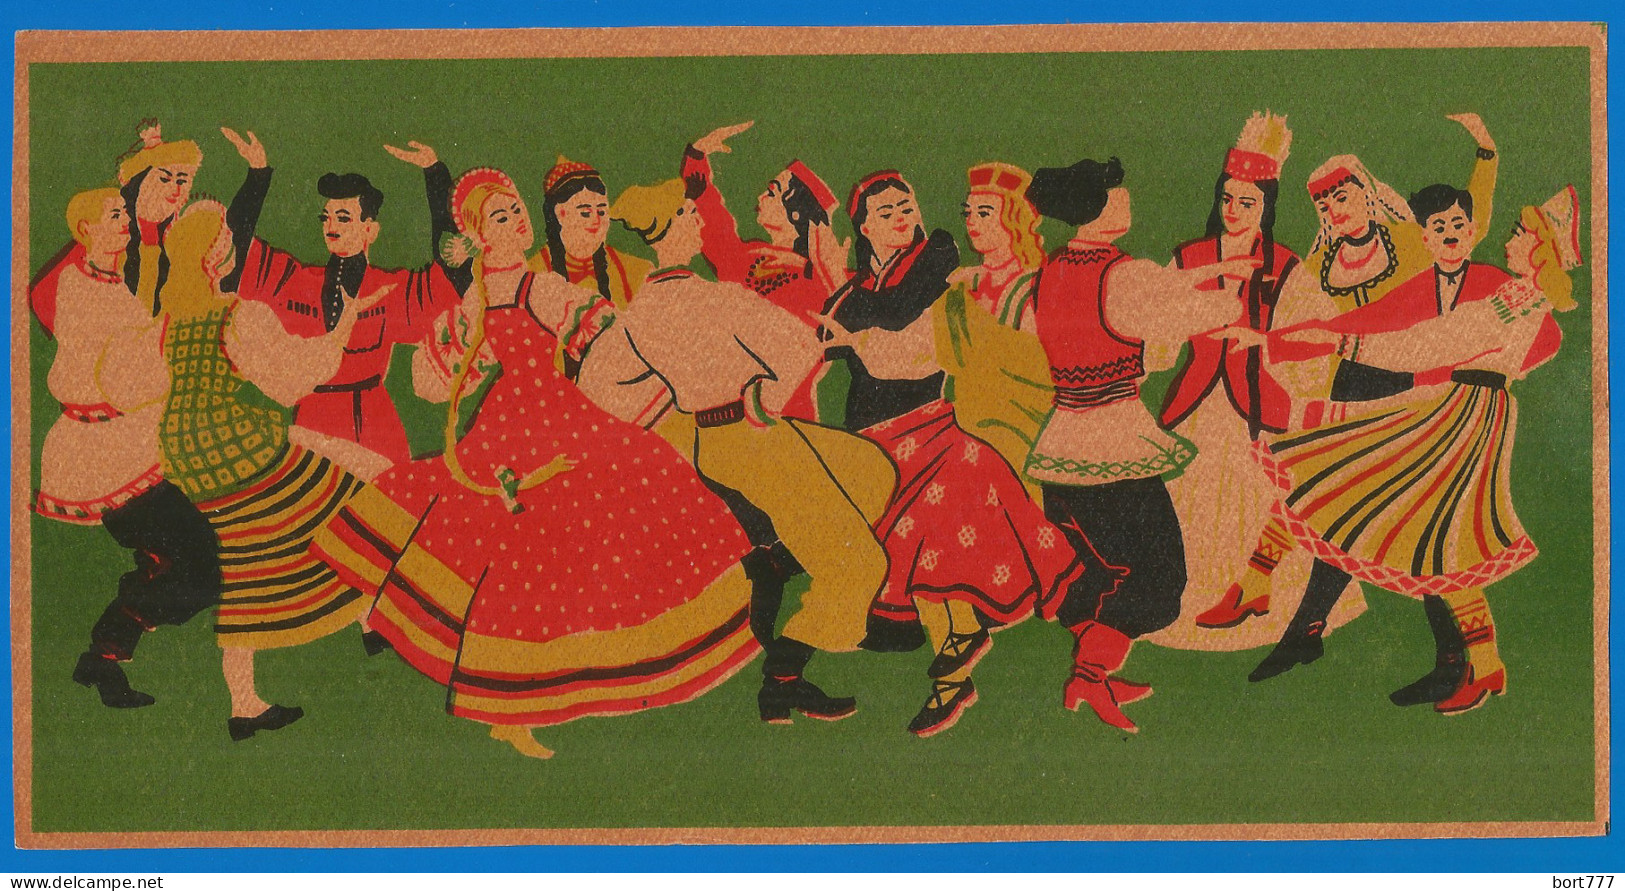 RUSSIA 1957 GROSS Matchbox Label - Dances Of Peoples Of The USSR (catalog # 13a ) - Matchbox Labels